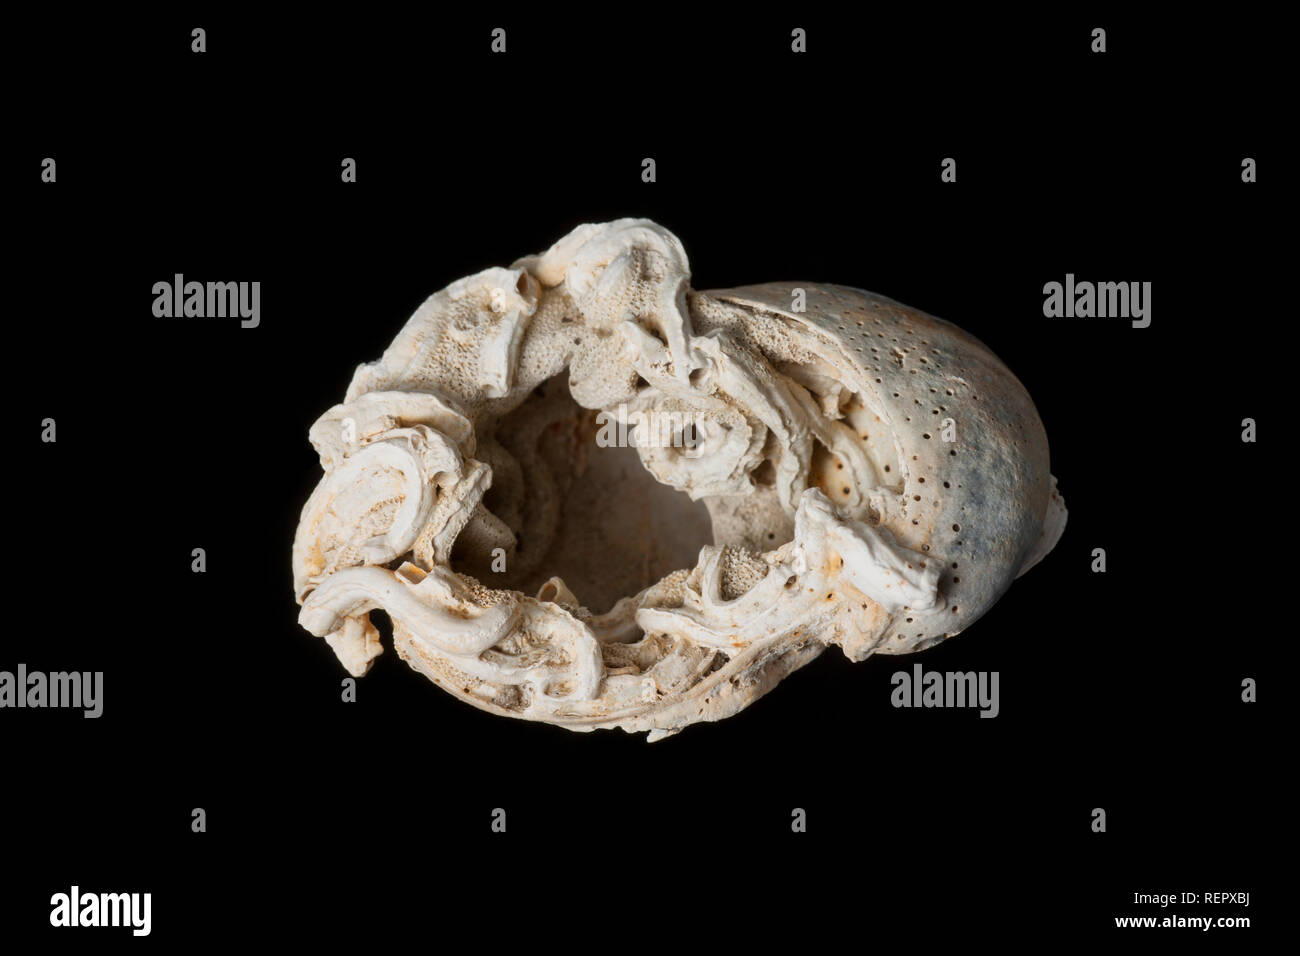 Calcareous tubes that are home to marine worms that have been made on sea shells, in this case a slipper limpet shell washed up on the shore. There ar Stock Photo